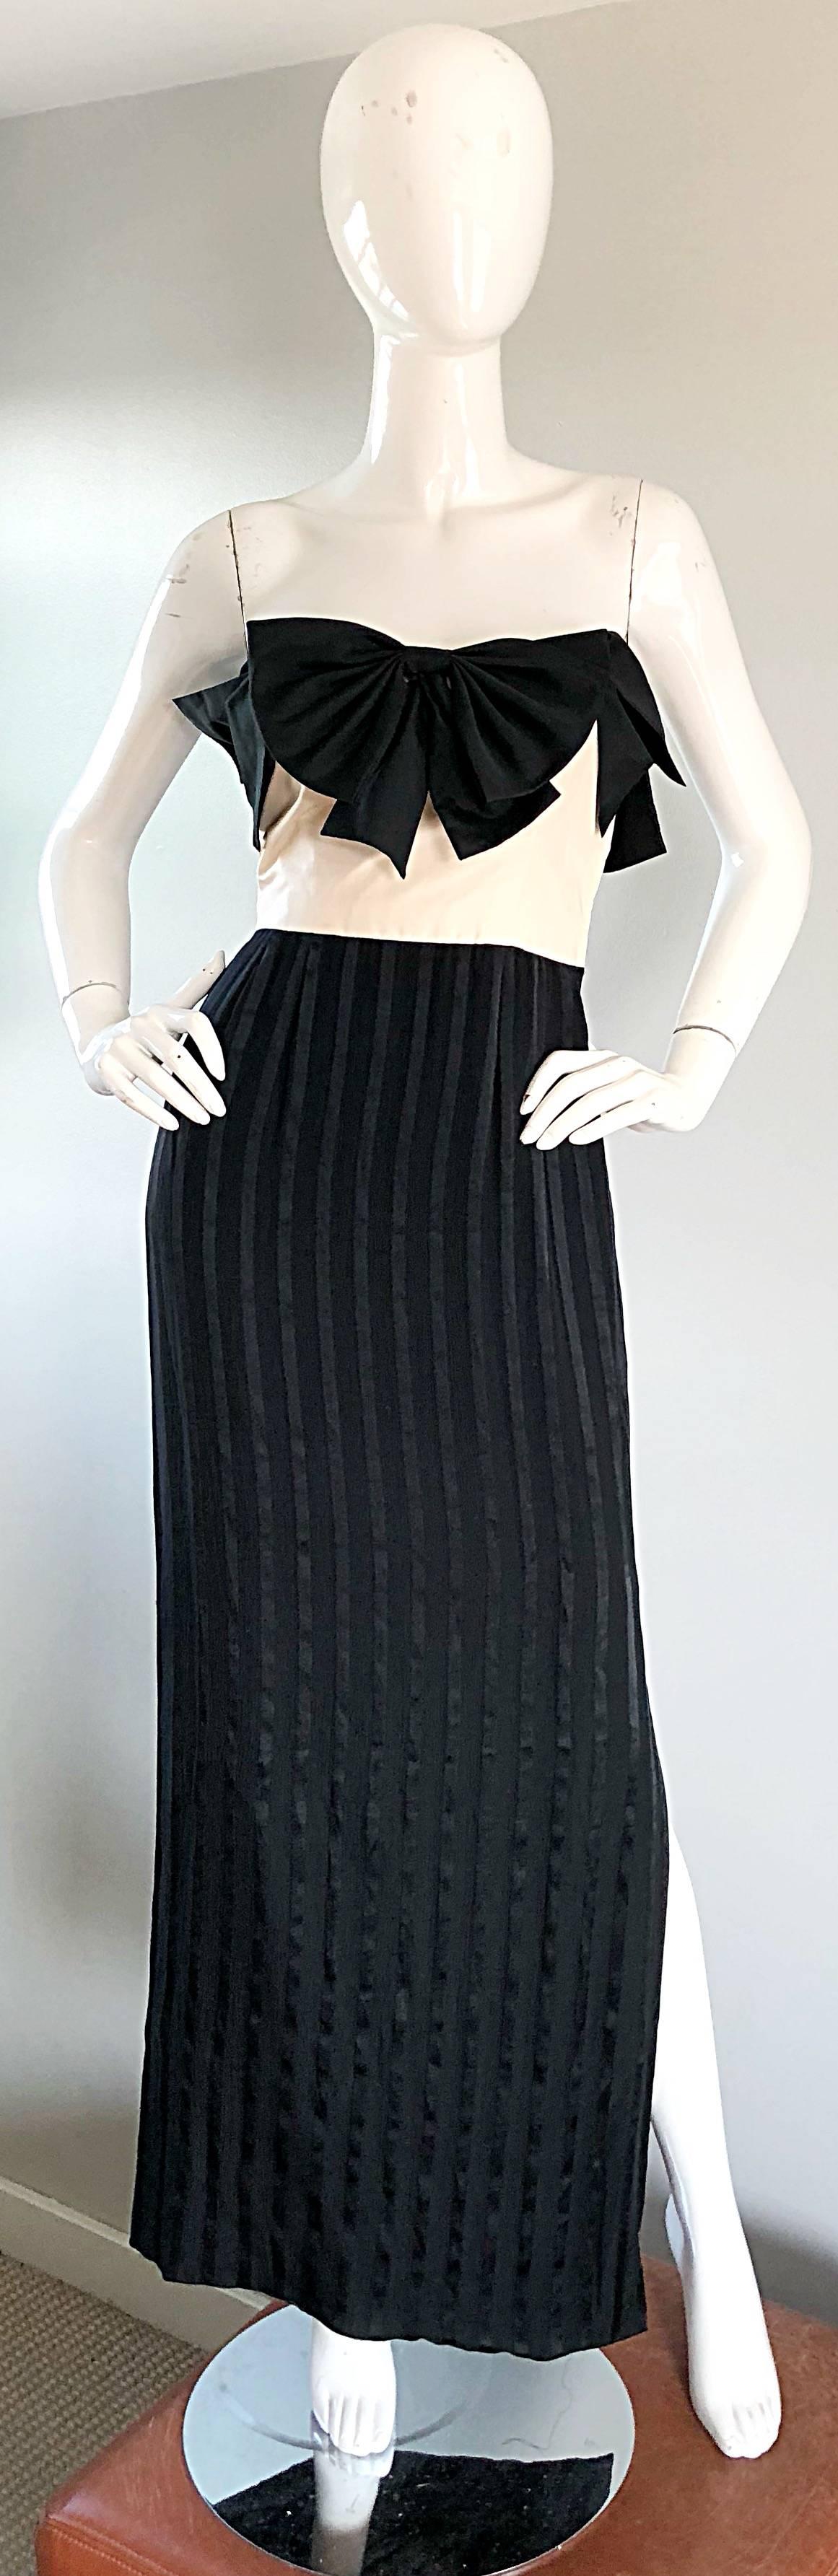 Stunning vintage JEAN LOUIS COUTURE black and white strapless silk evening gown! Features black bows along the front and back top bodice. Ivory silk taffeta bodice, with a black silk skirt. Slit up the left leg reveals just the right amount of skin.